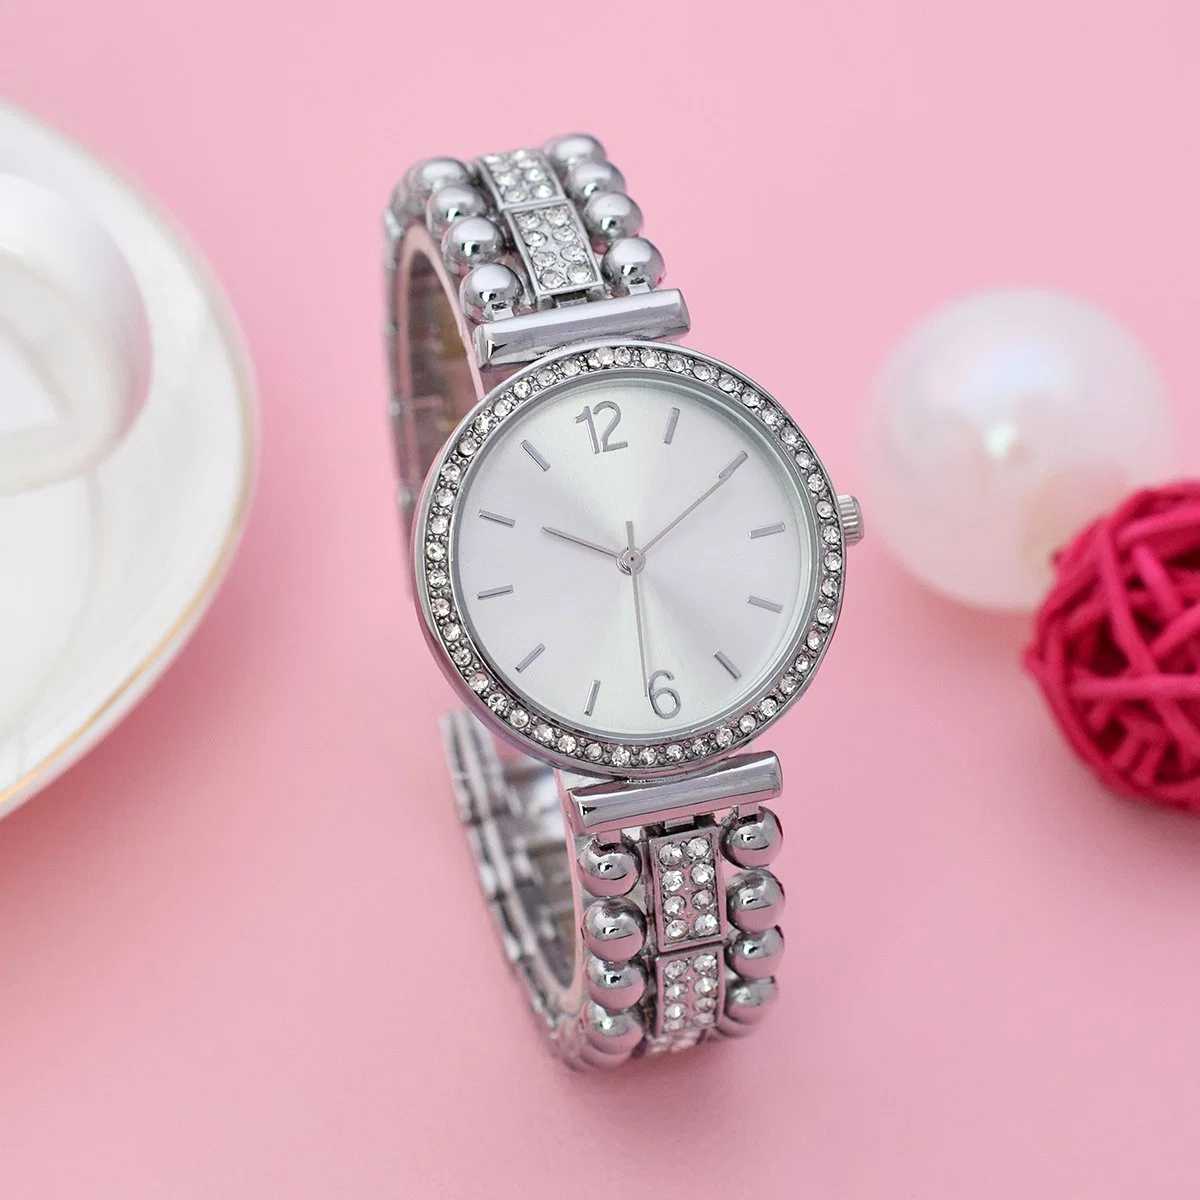 High Quality Brand Watch Women Metal Lady Watches Alloy Quartz Watch for Gift Promotion